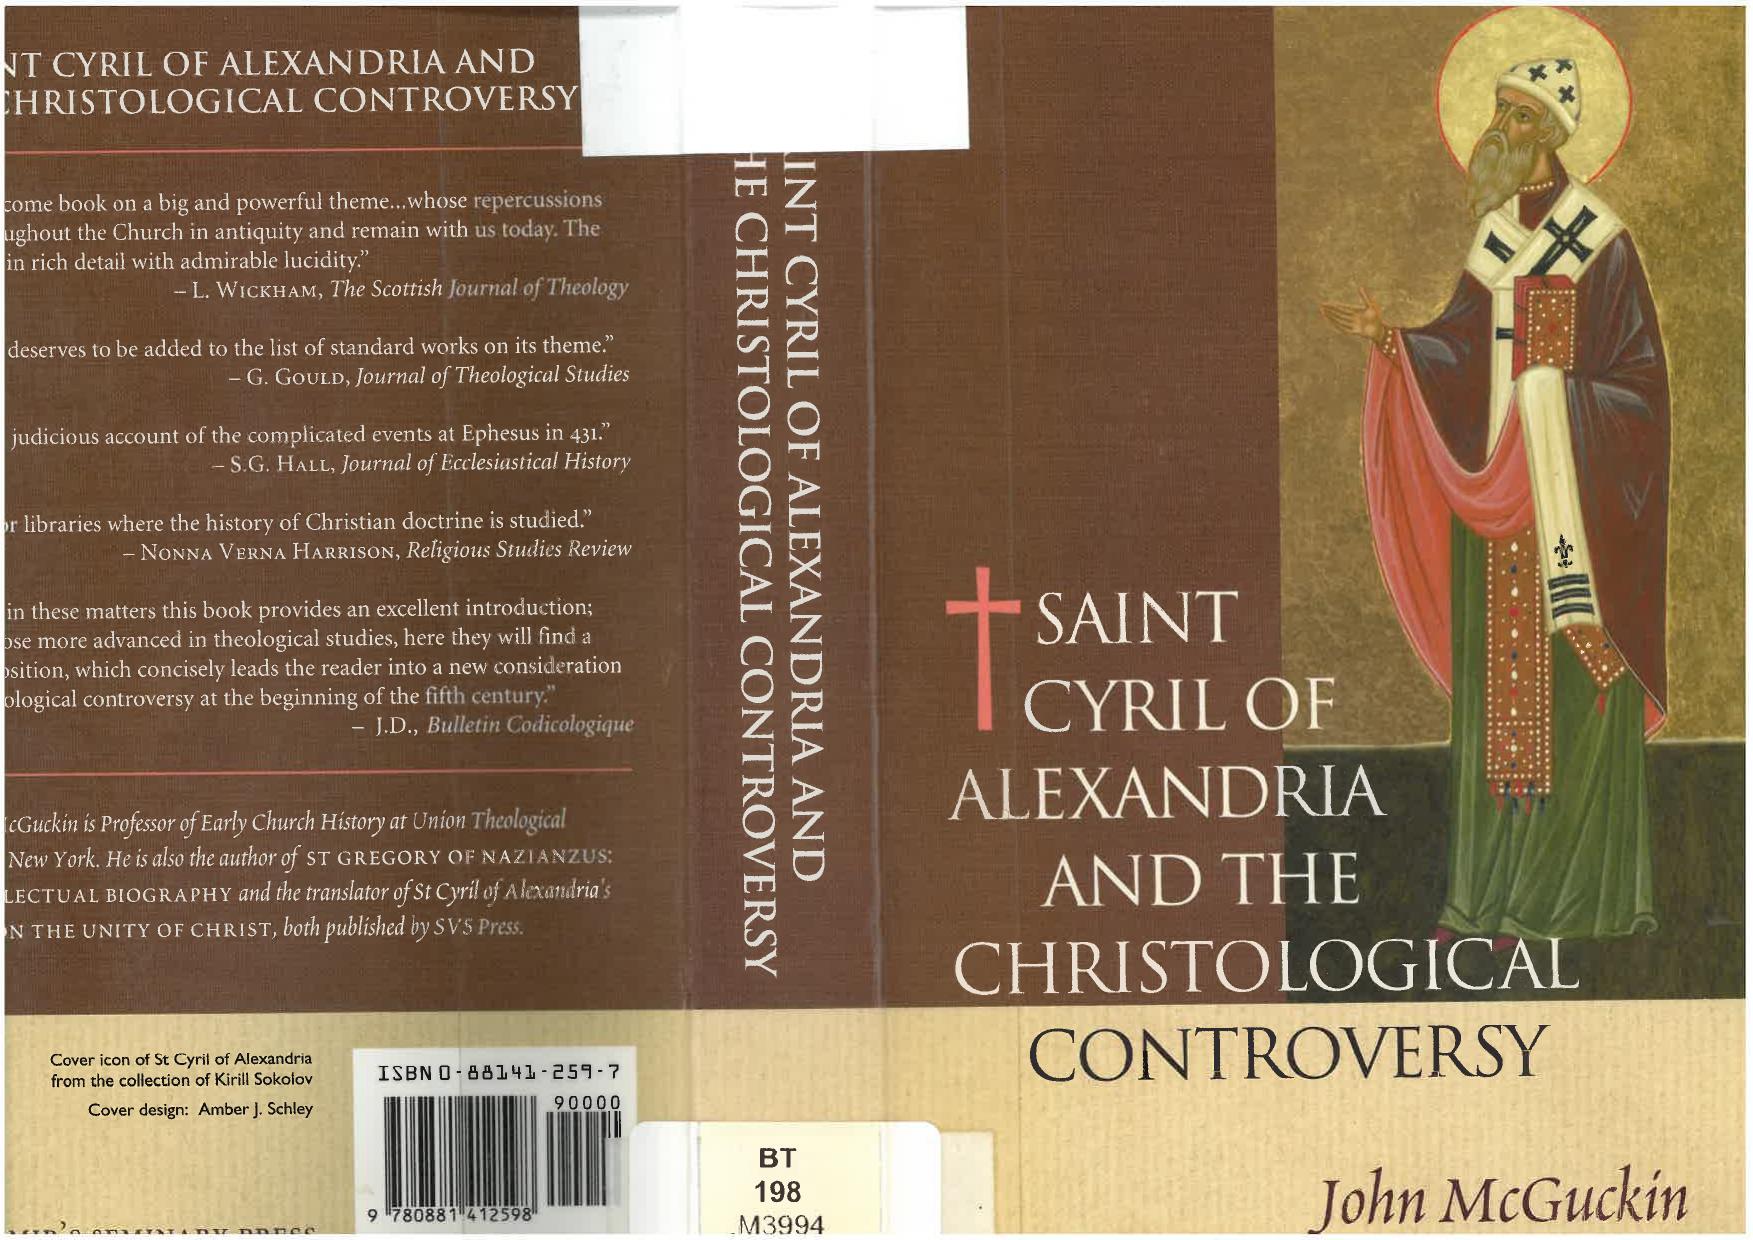 Saint Cyril of Alexandria and the Christological Controversy by John Anthony McGuckin